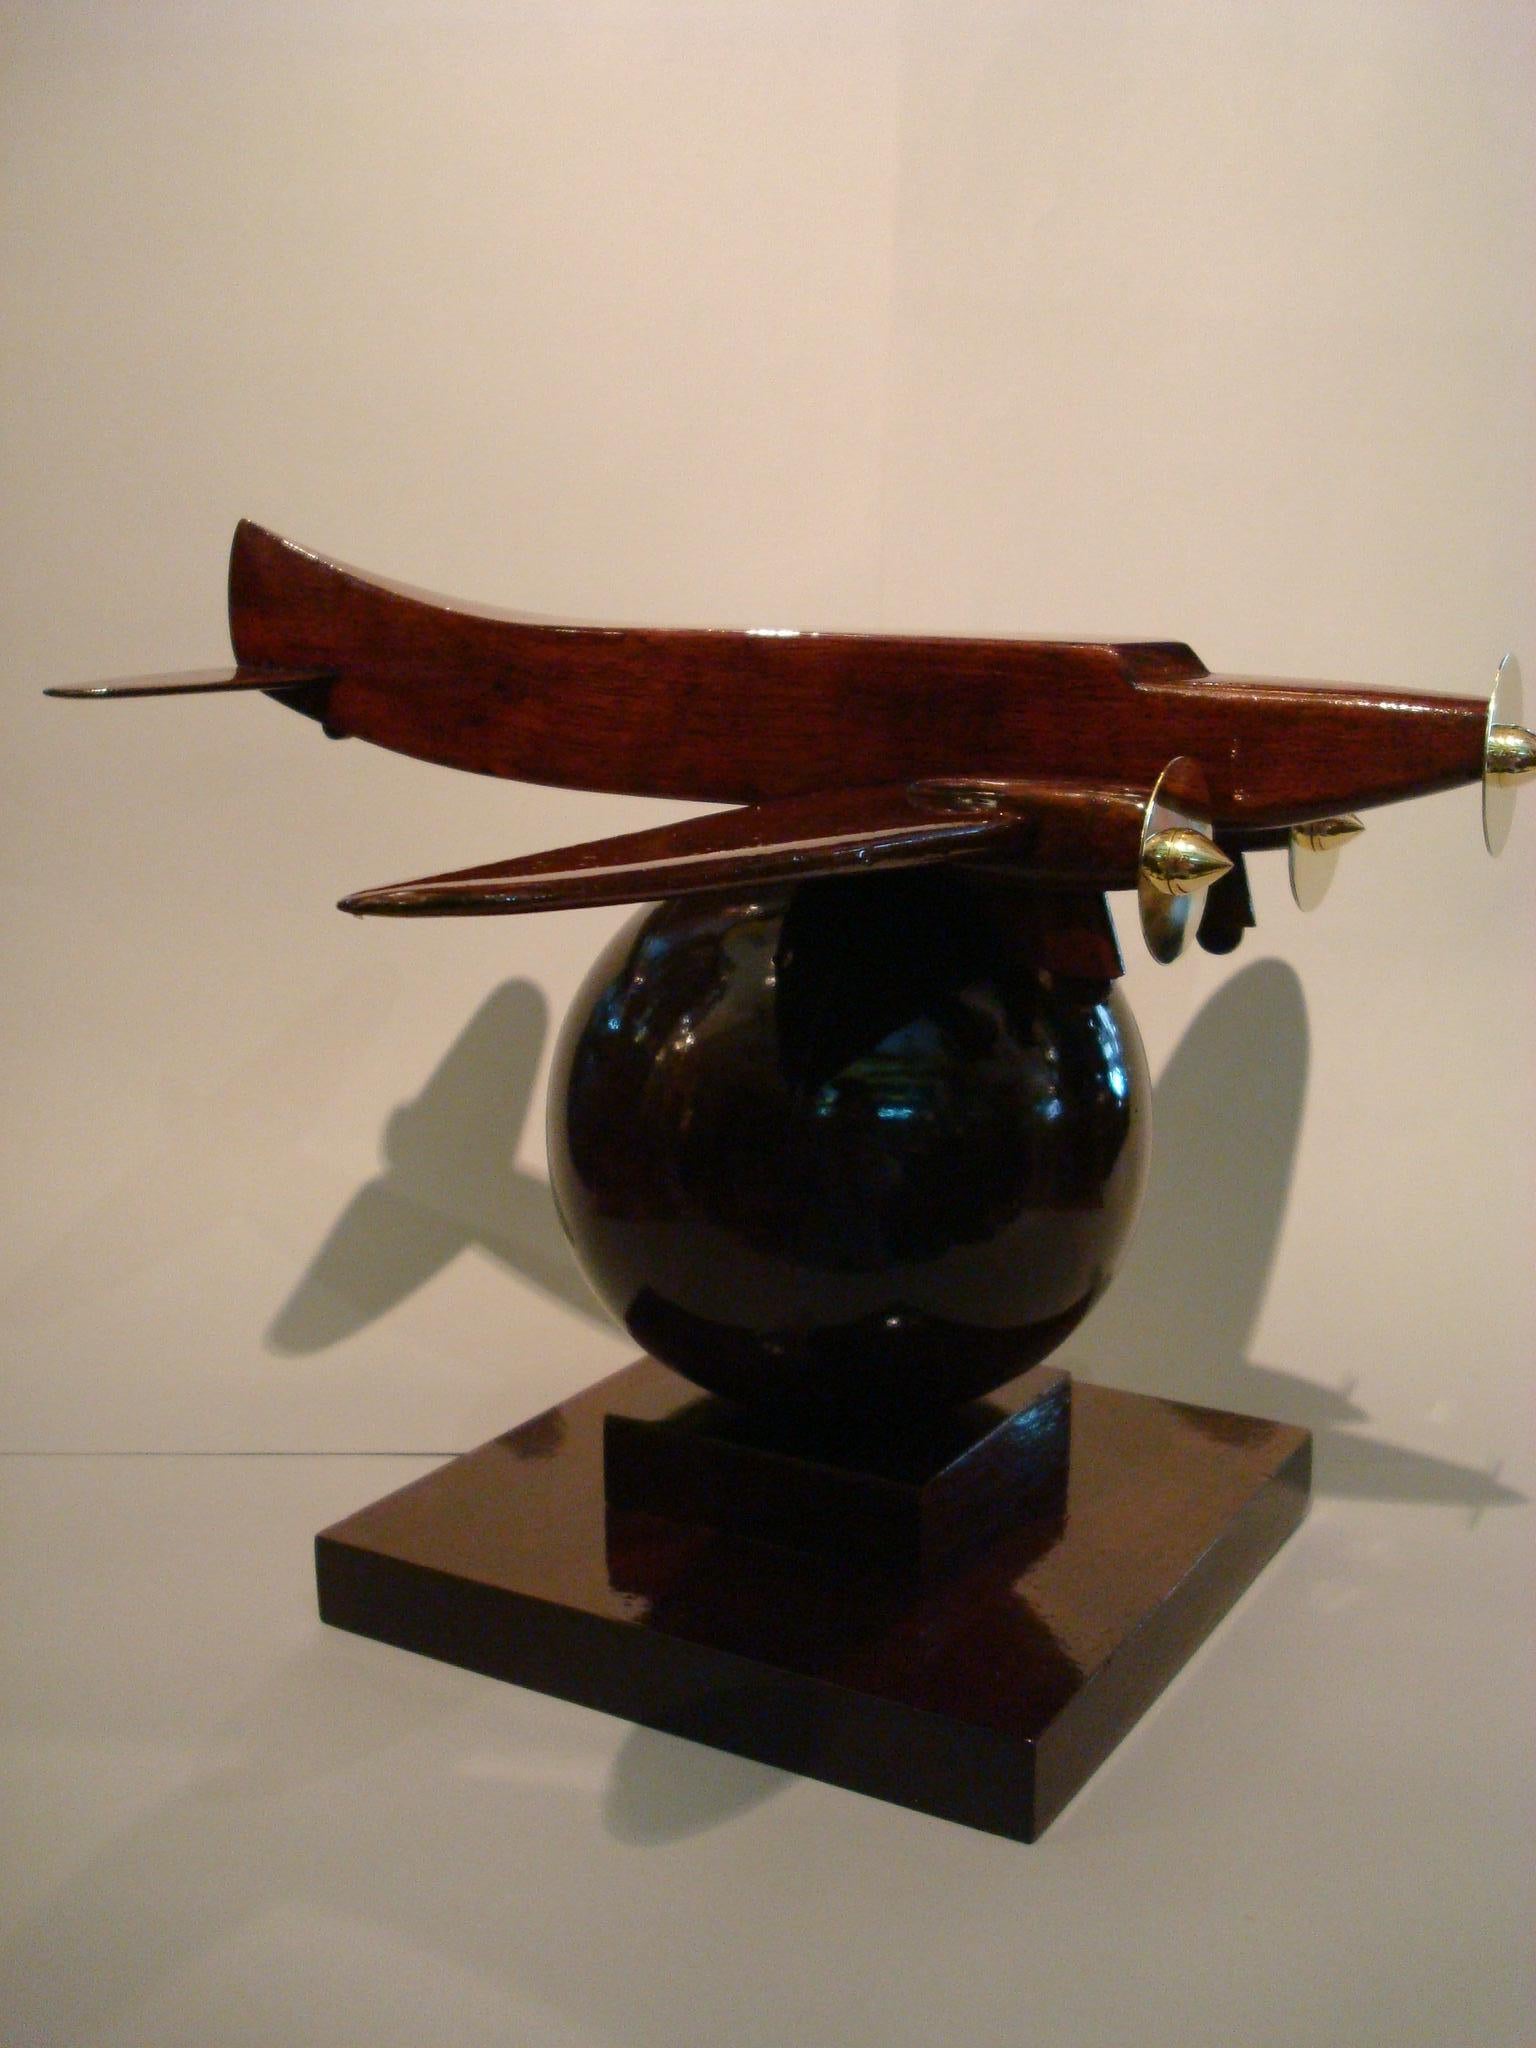 Art Deco Wooden Airplane Model of a Couzinet 1